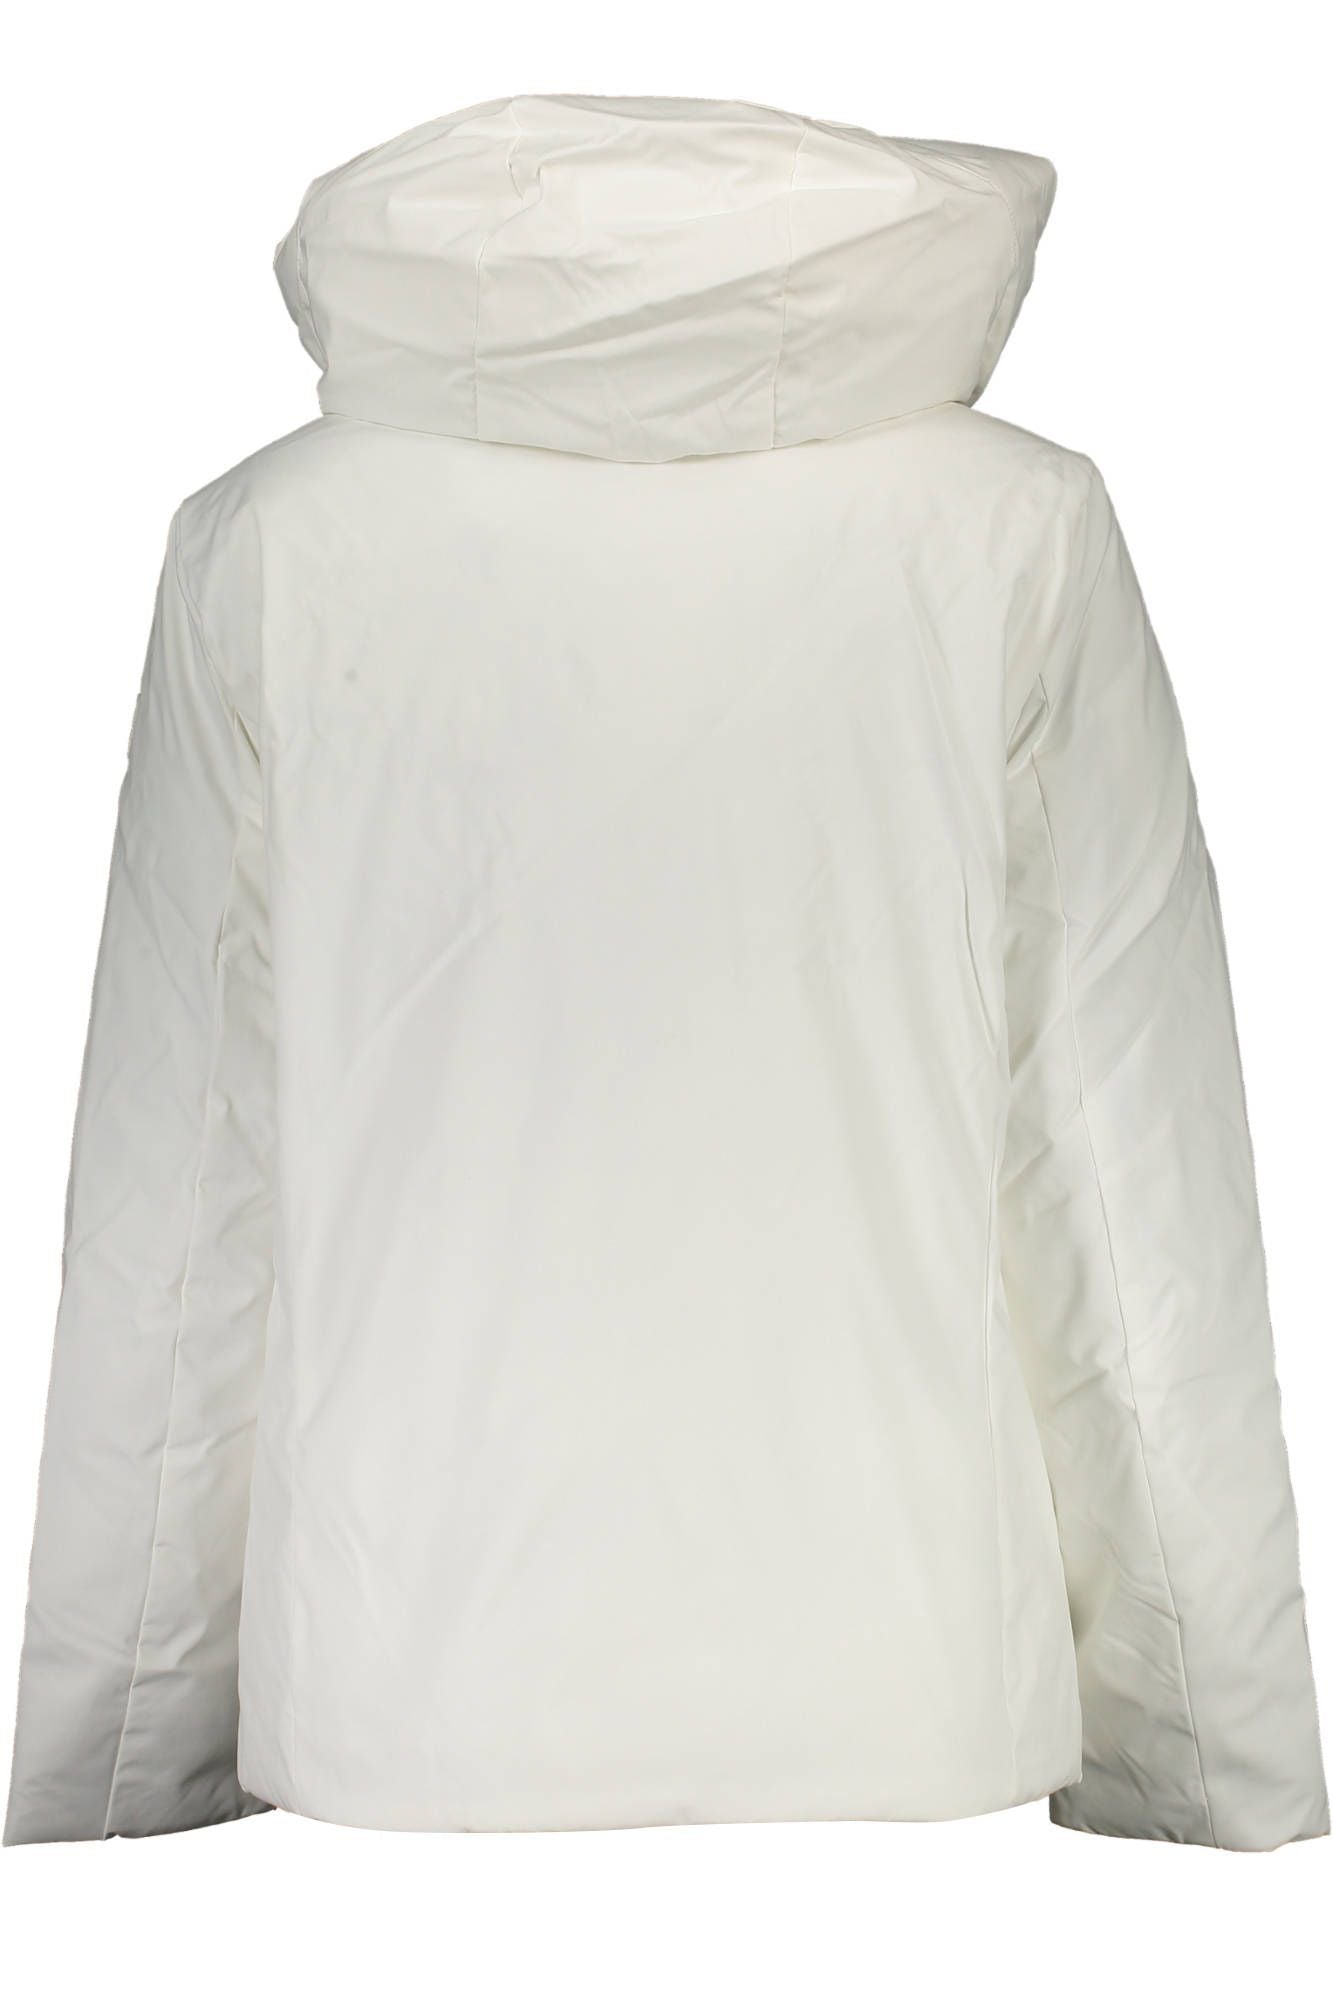 North Sails Chic White Hooded Jacket